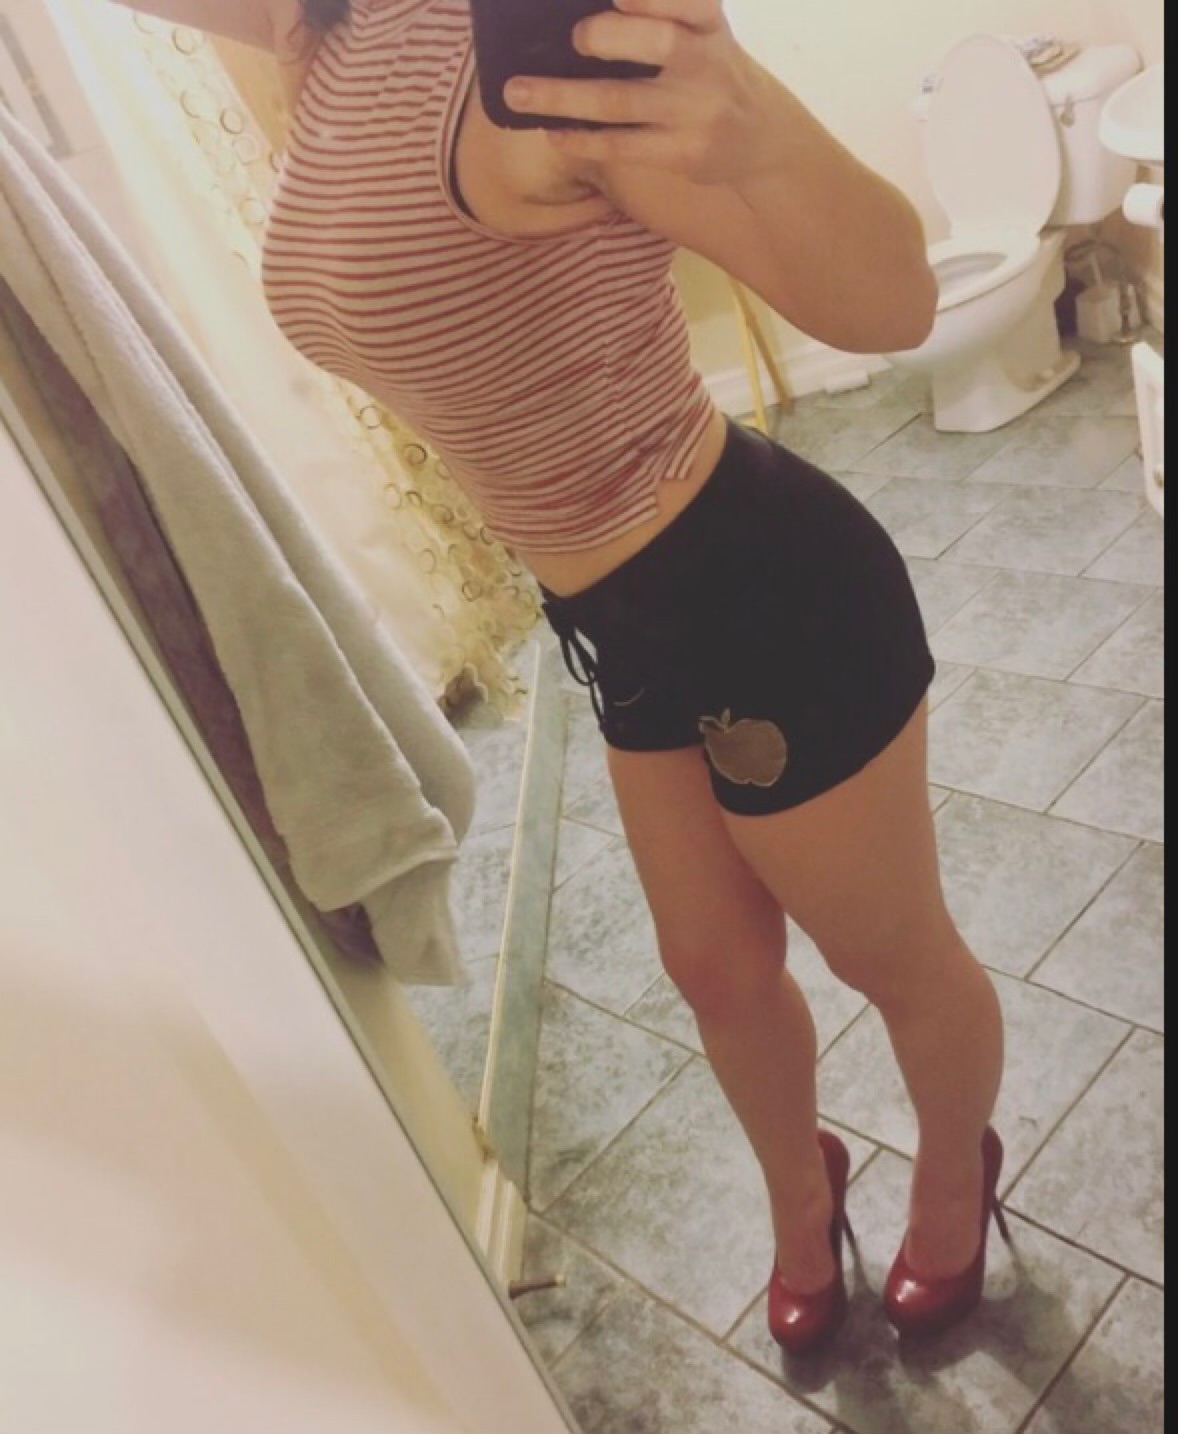 Mary-lou Escort in Montreal - Laval - South Shore | Mary-lou has a passion for life and new experiences. Escort in Montreal - Laval - South Shore